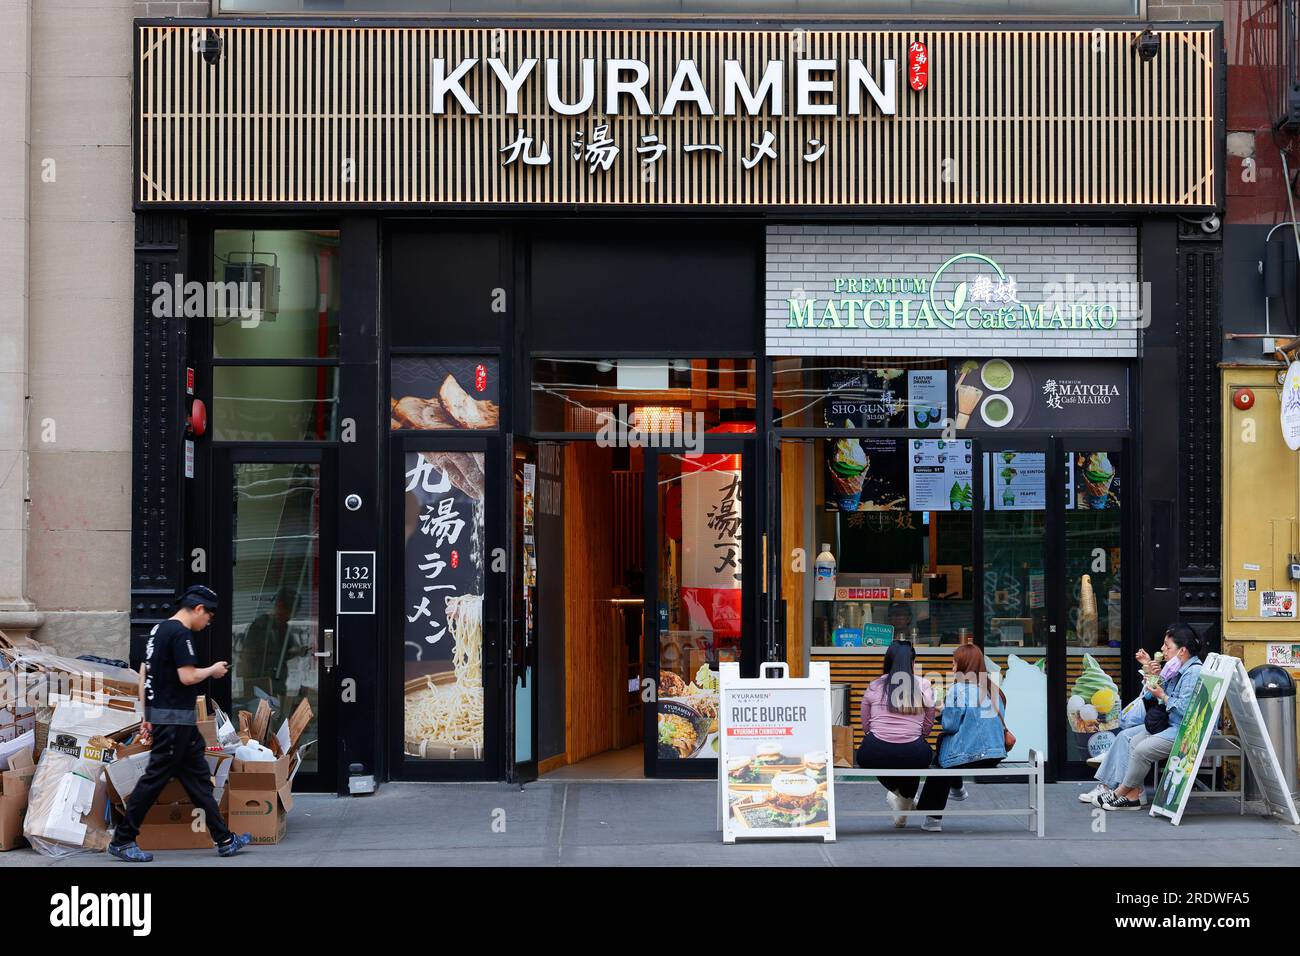 Kyuramen 九湯, Matcha Cafe Maiko 舞妓, 132 Bowery, New York, NYC storefront photo of Asian eateries and franchises in Manhattan Chinatown. Stock Photo